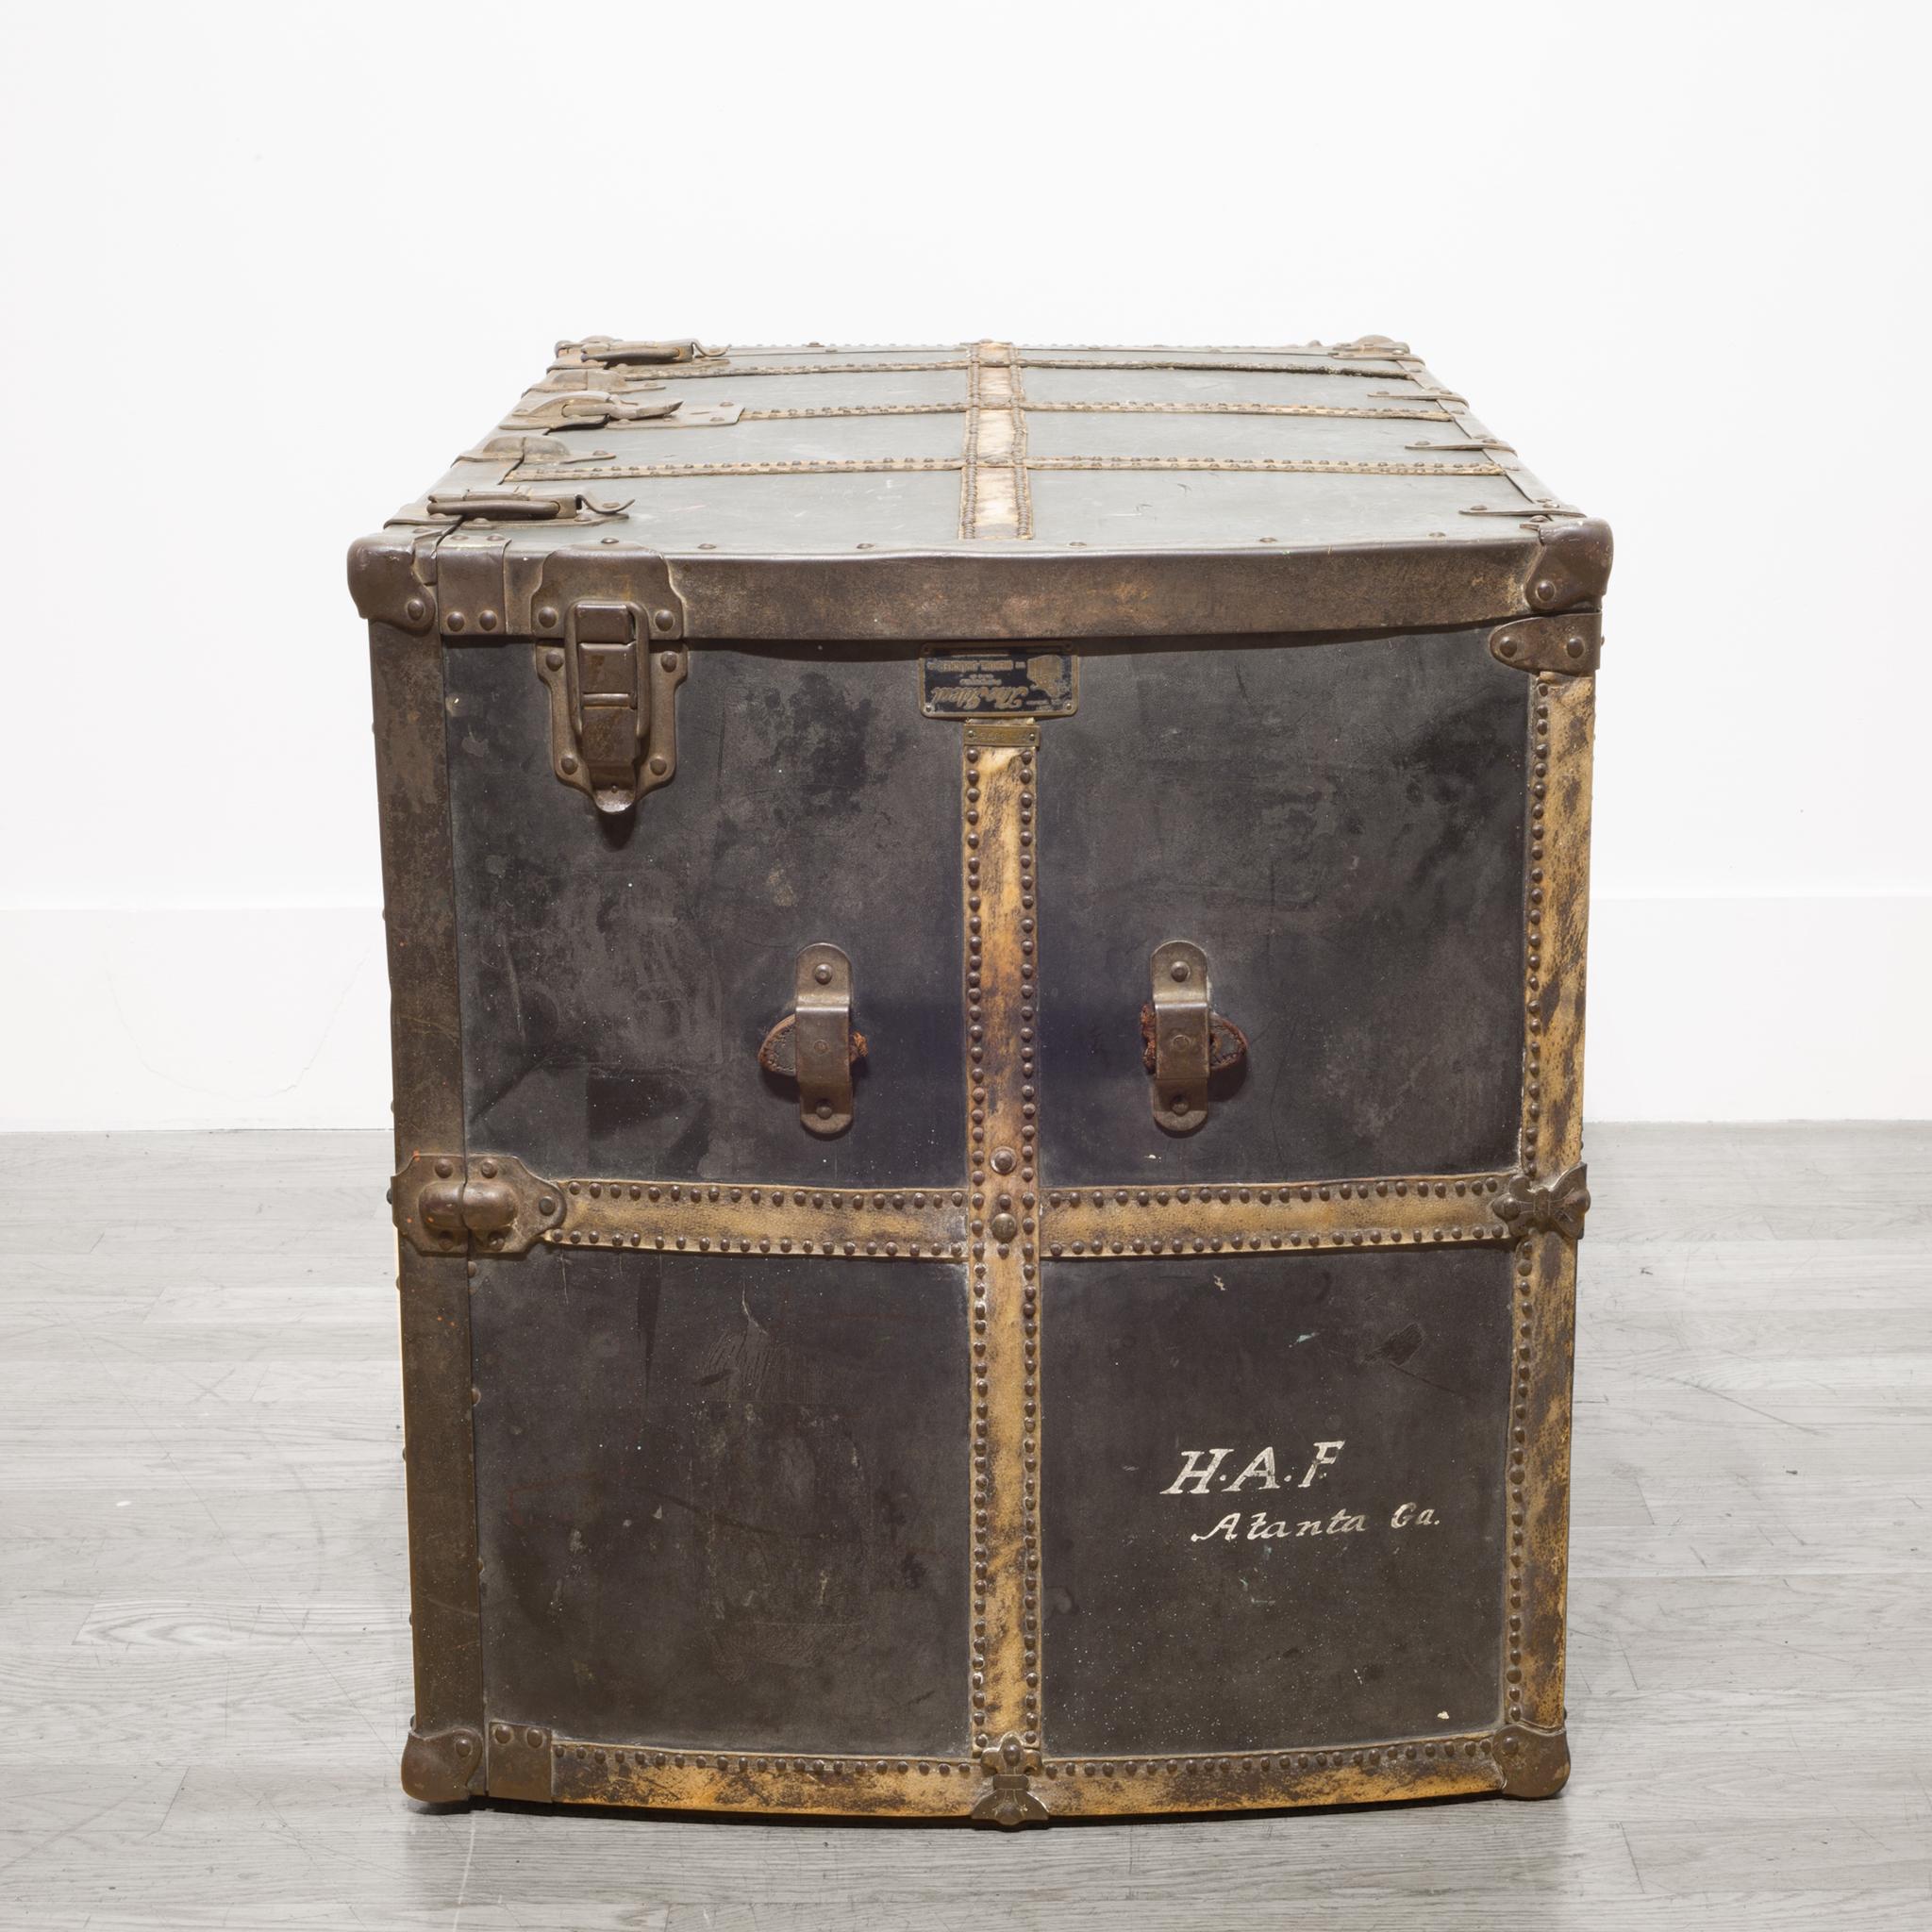 About

This is a large metal trunk with riveted metal bands and the original metal label by Mendel Drucker. The trunk opens up with sliding hangers and drawers with secret compartments. The trunk can be turned on its side and used a